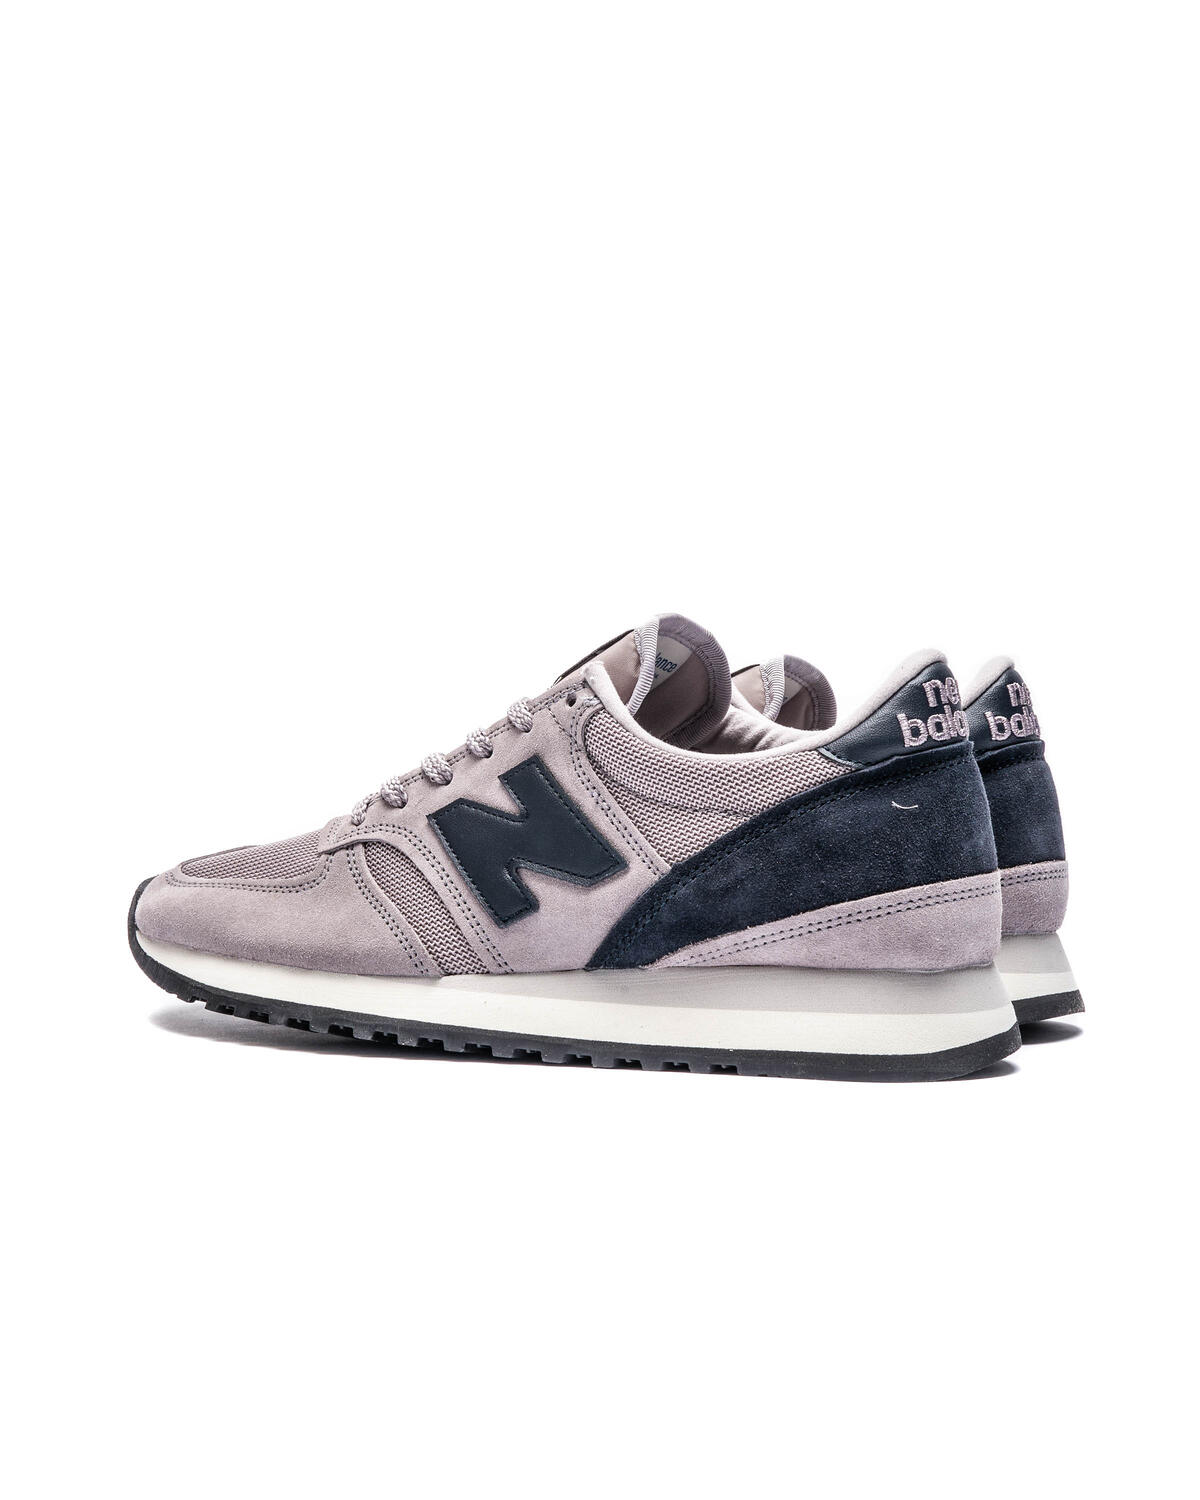 New Balance M 730 GGN | M730GGN | AFEW STORE